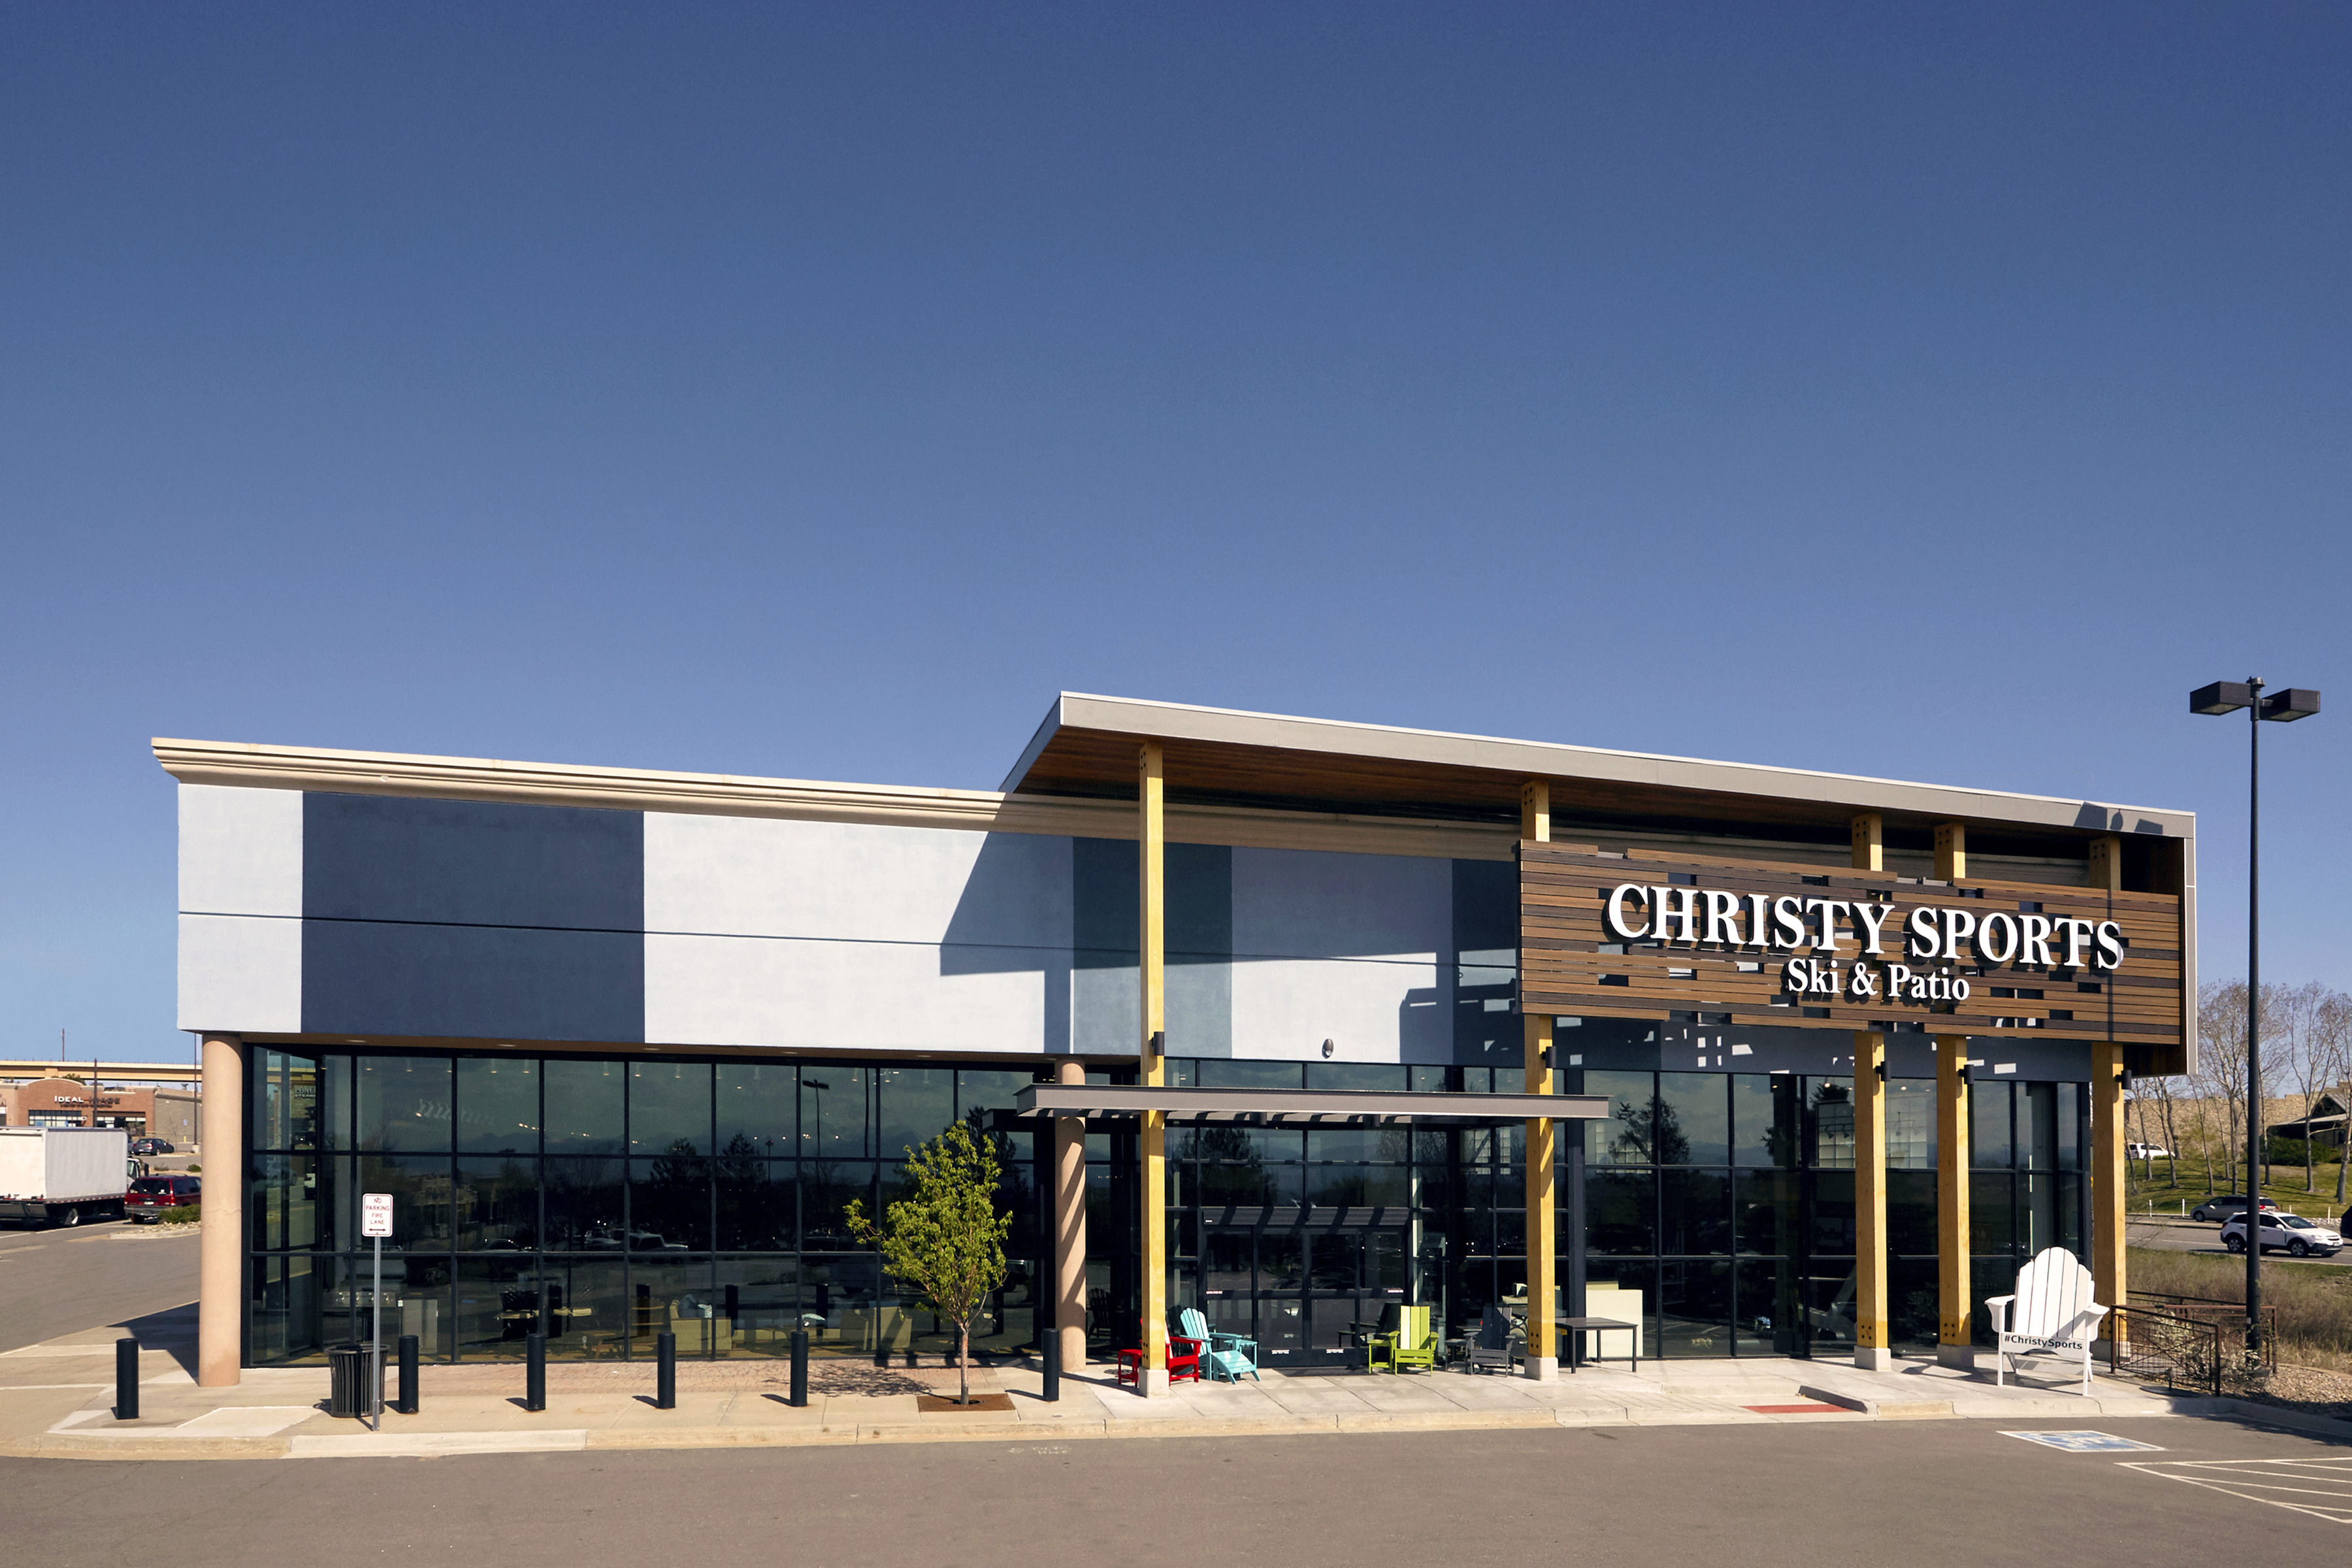 Image shows the exterior of a Christy Sports Patio Showroom store